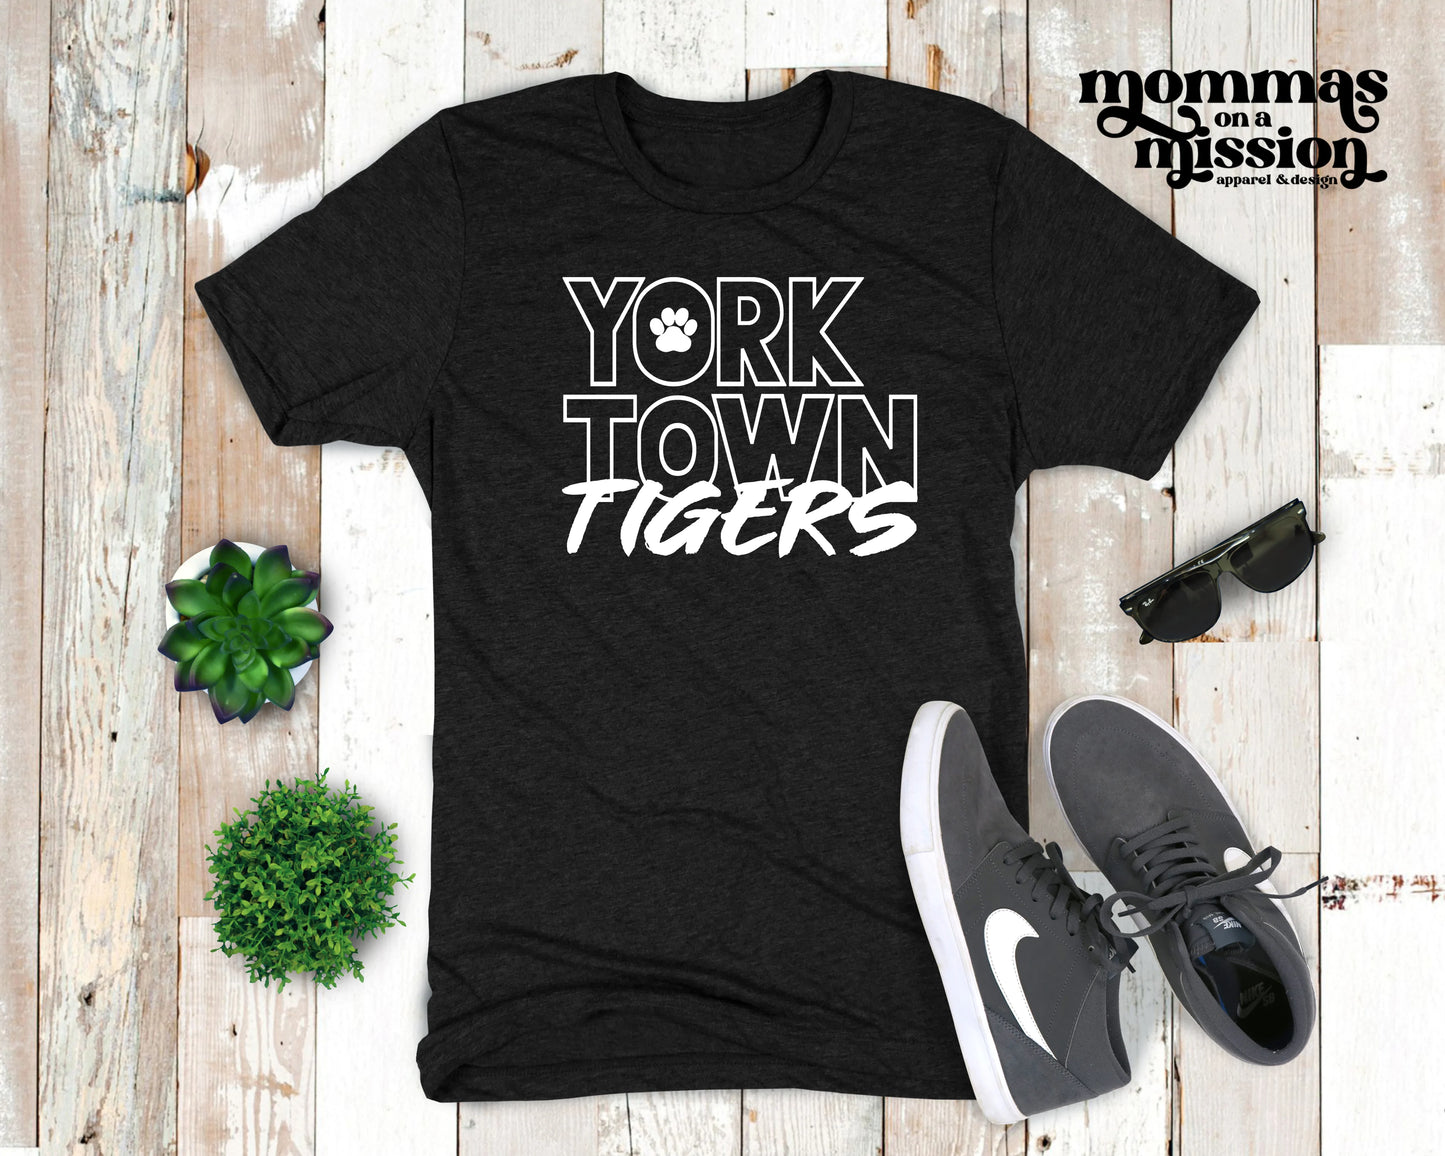 outline yorktown with rugged tigers (youth)